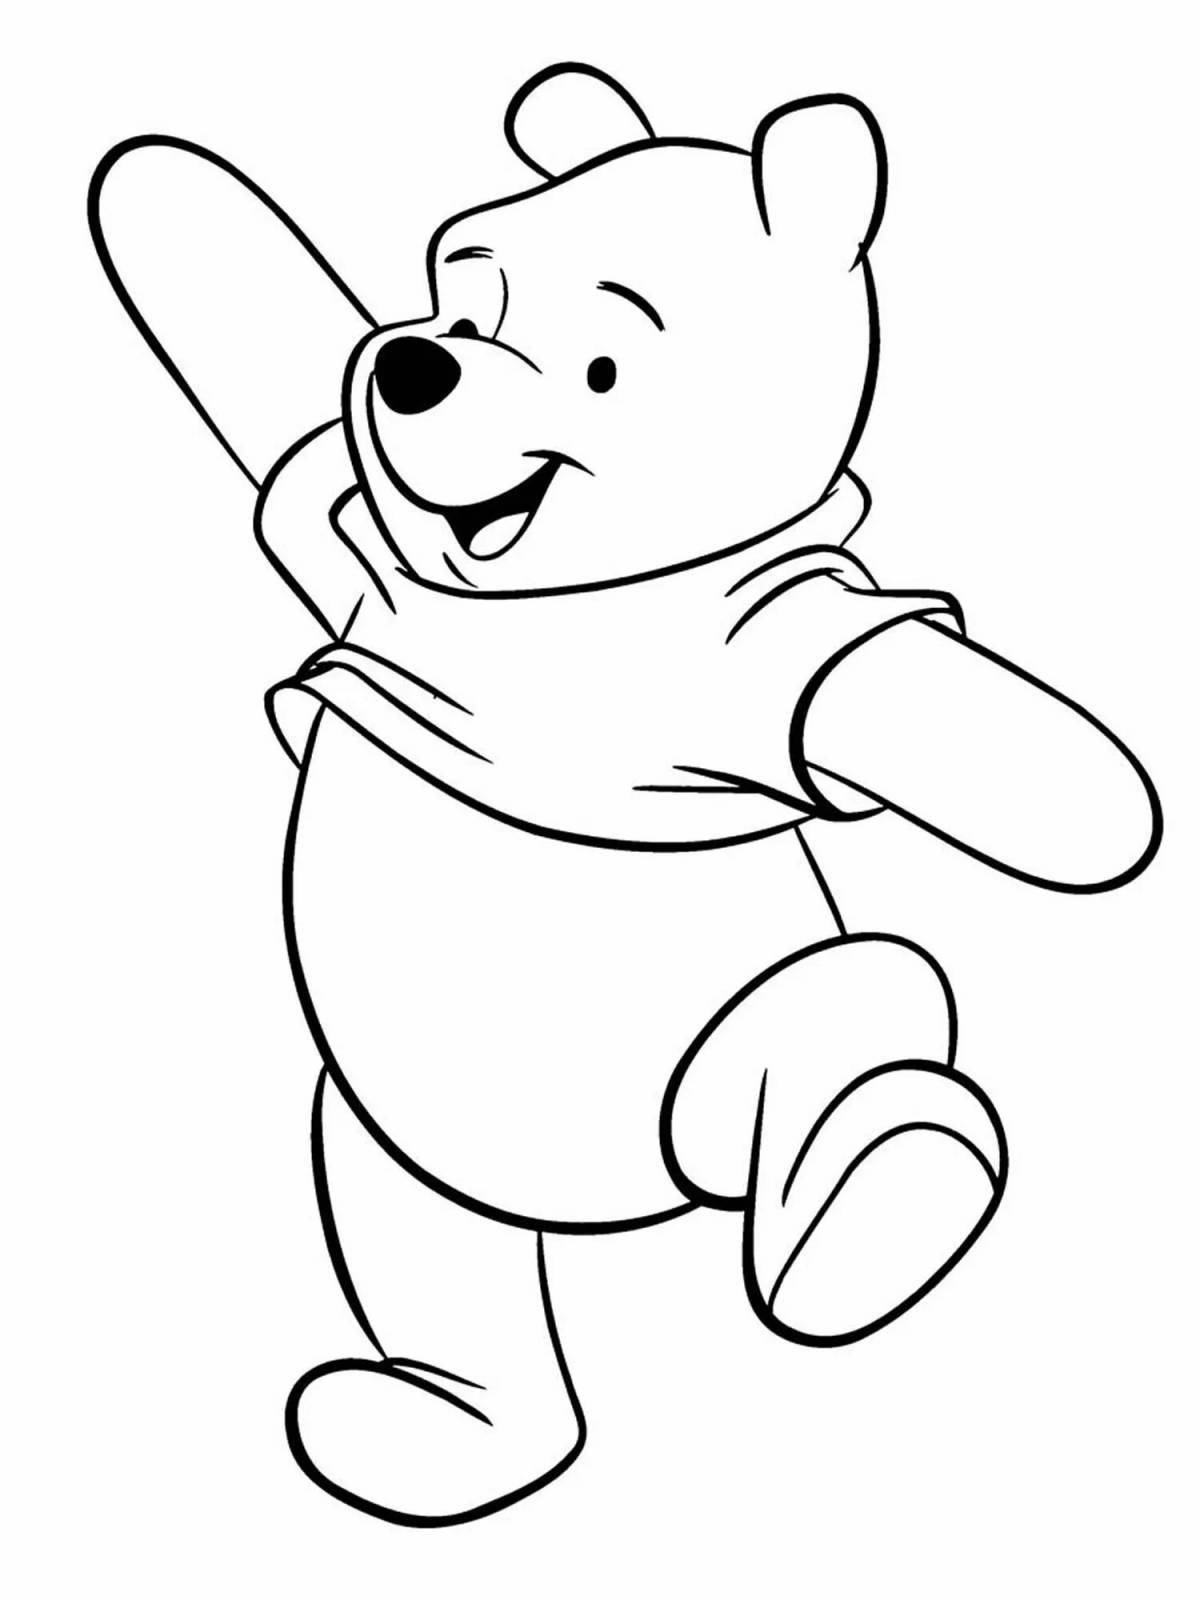 Playful winnie the pooh coloring book for kids